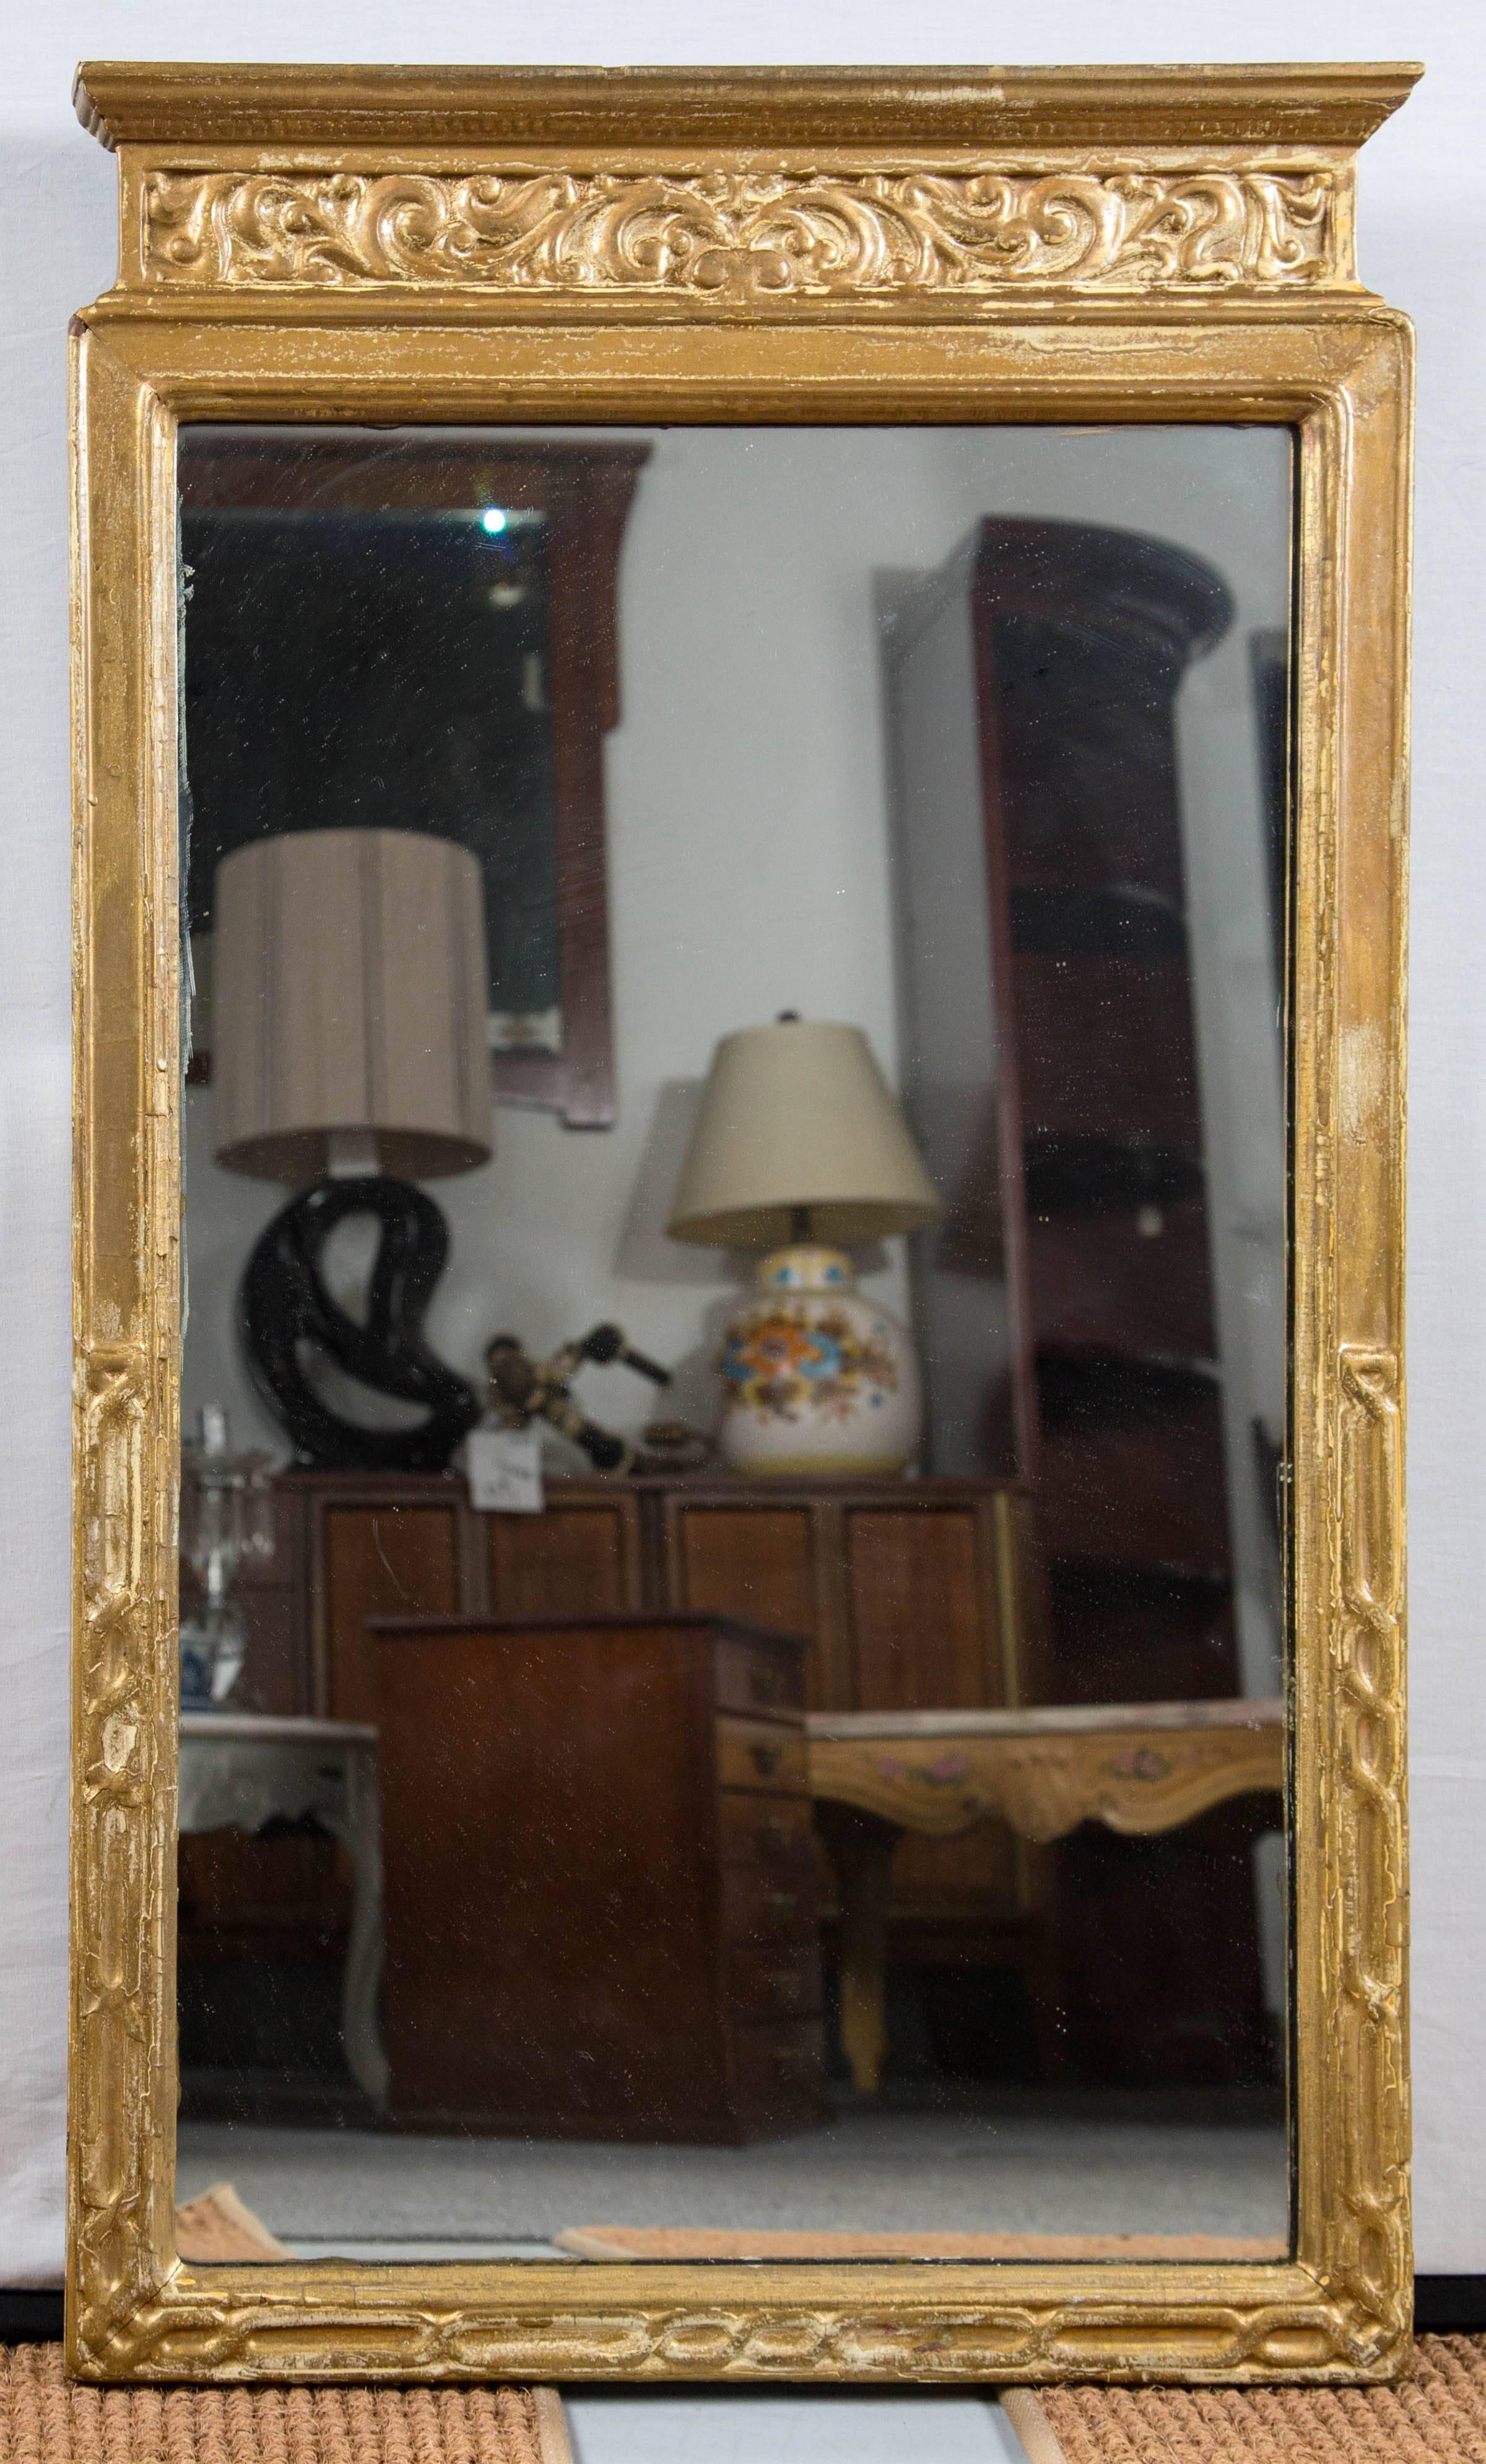 Neoclassic giltwood frame mirror, circa 1920s. Lovely pediment shape frame with carved detail across top and sides. Aged gilt surface. 